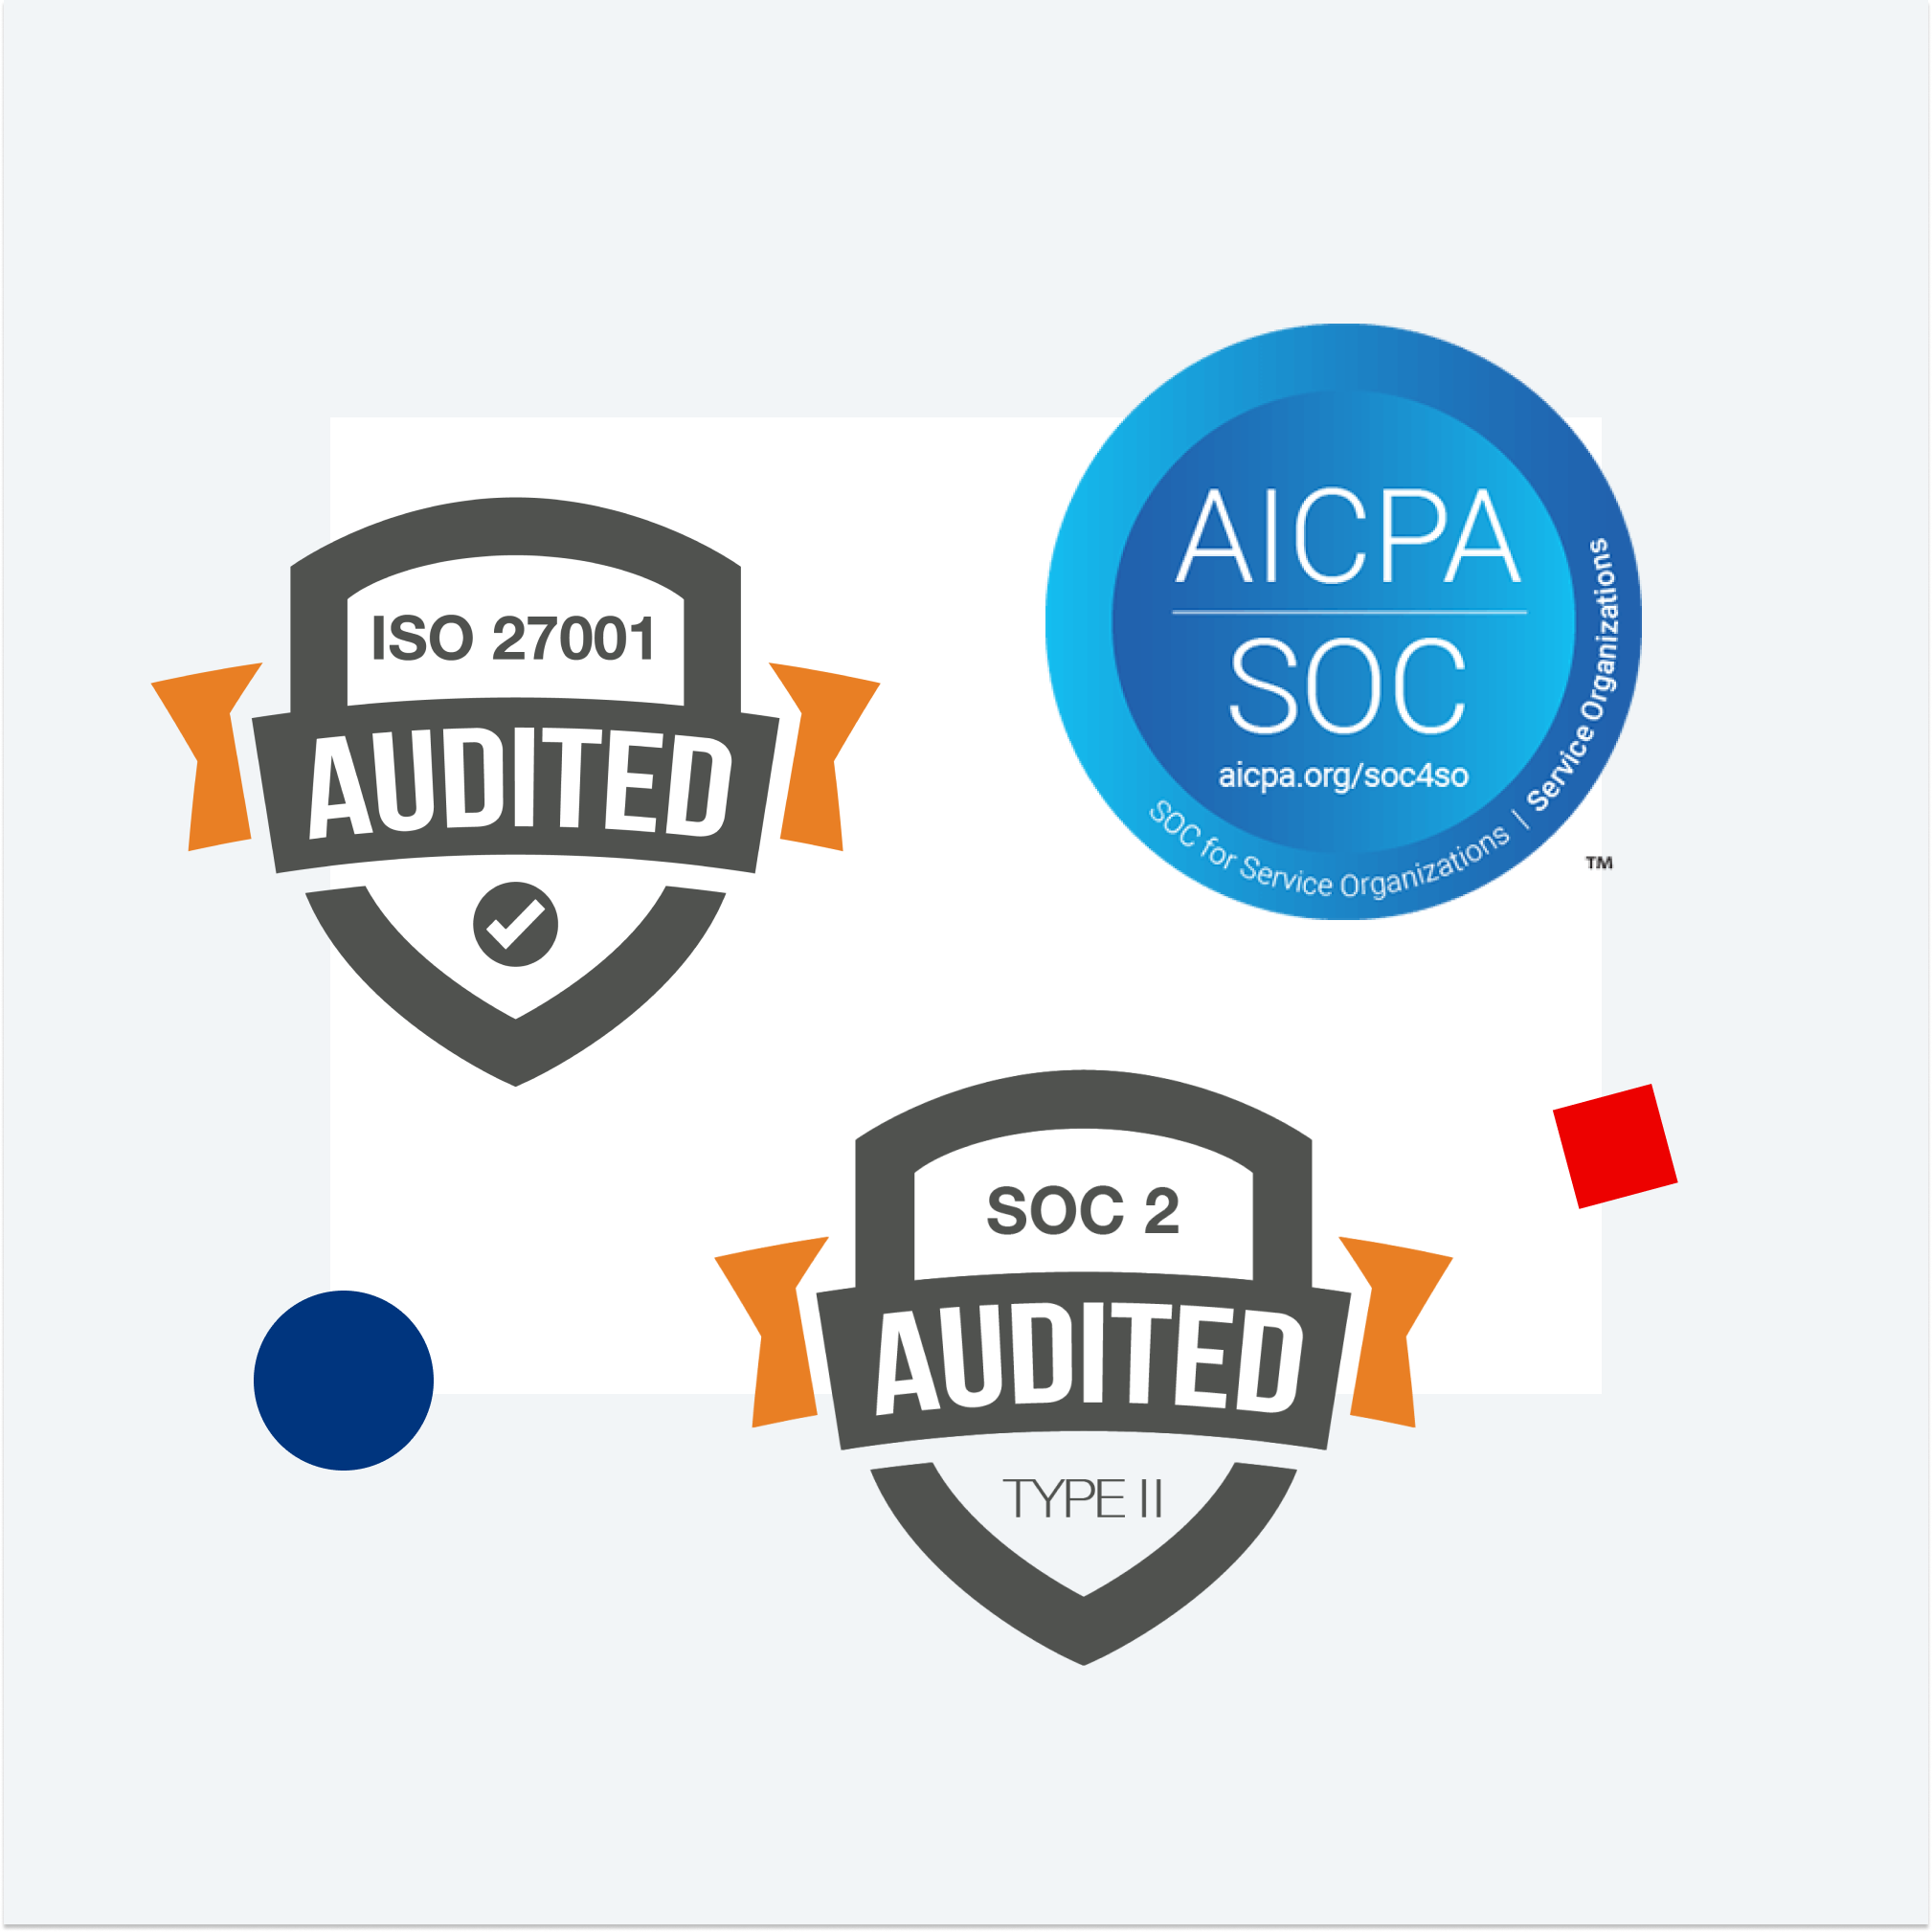 ISO 27001, AICPA SOC, and SOC 2 Type II certification badges 